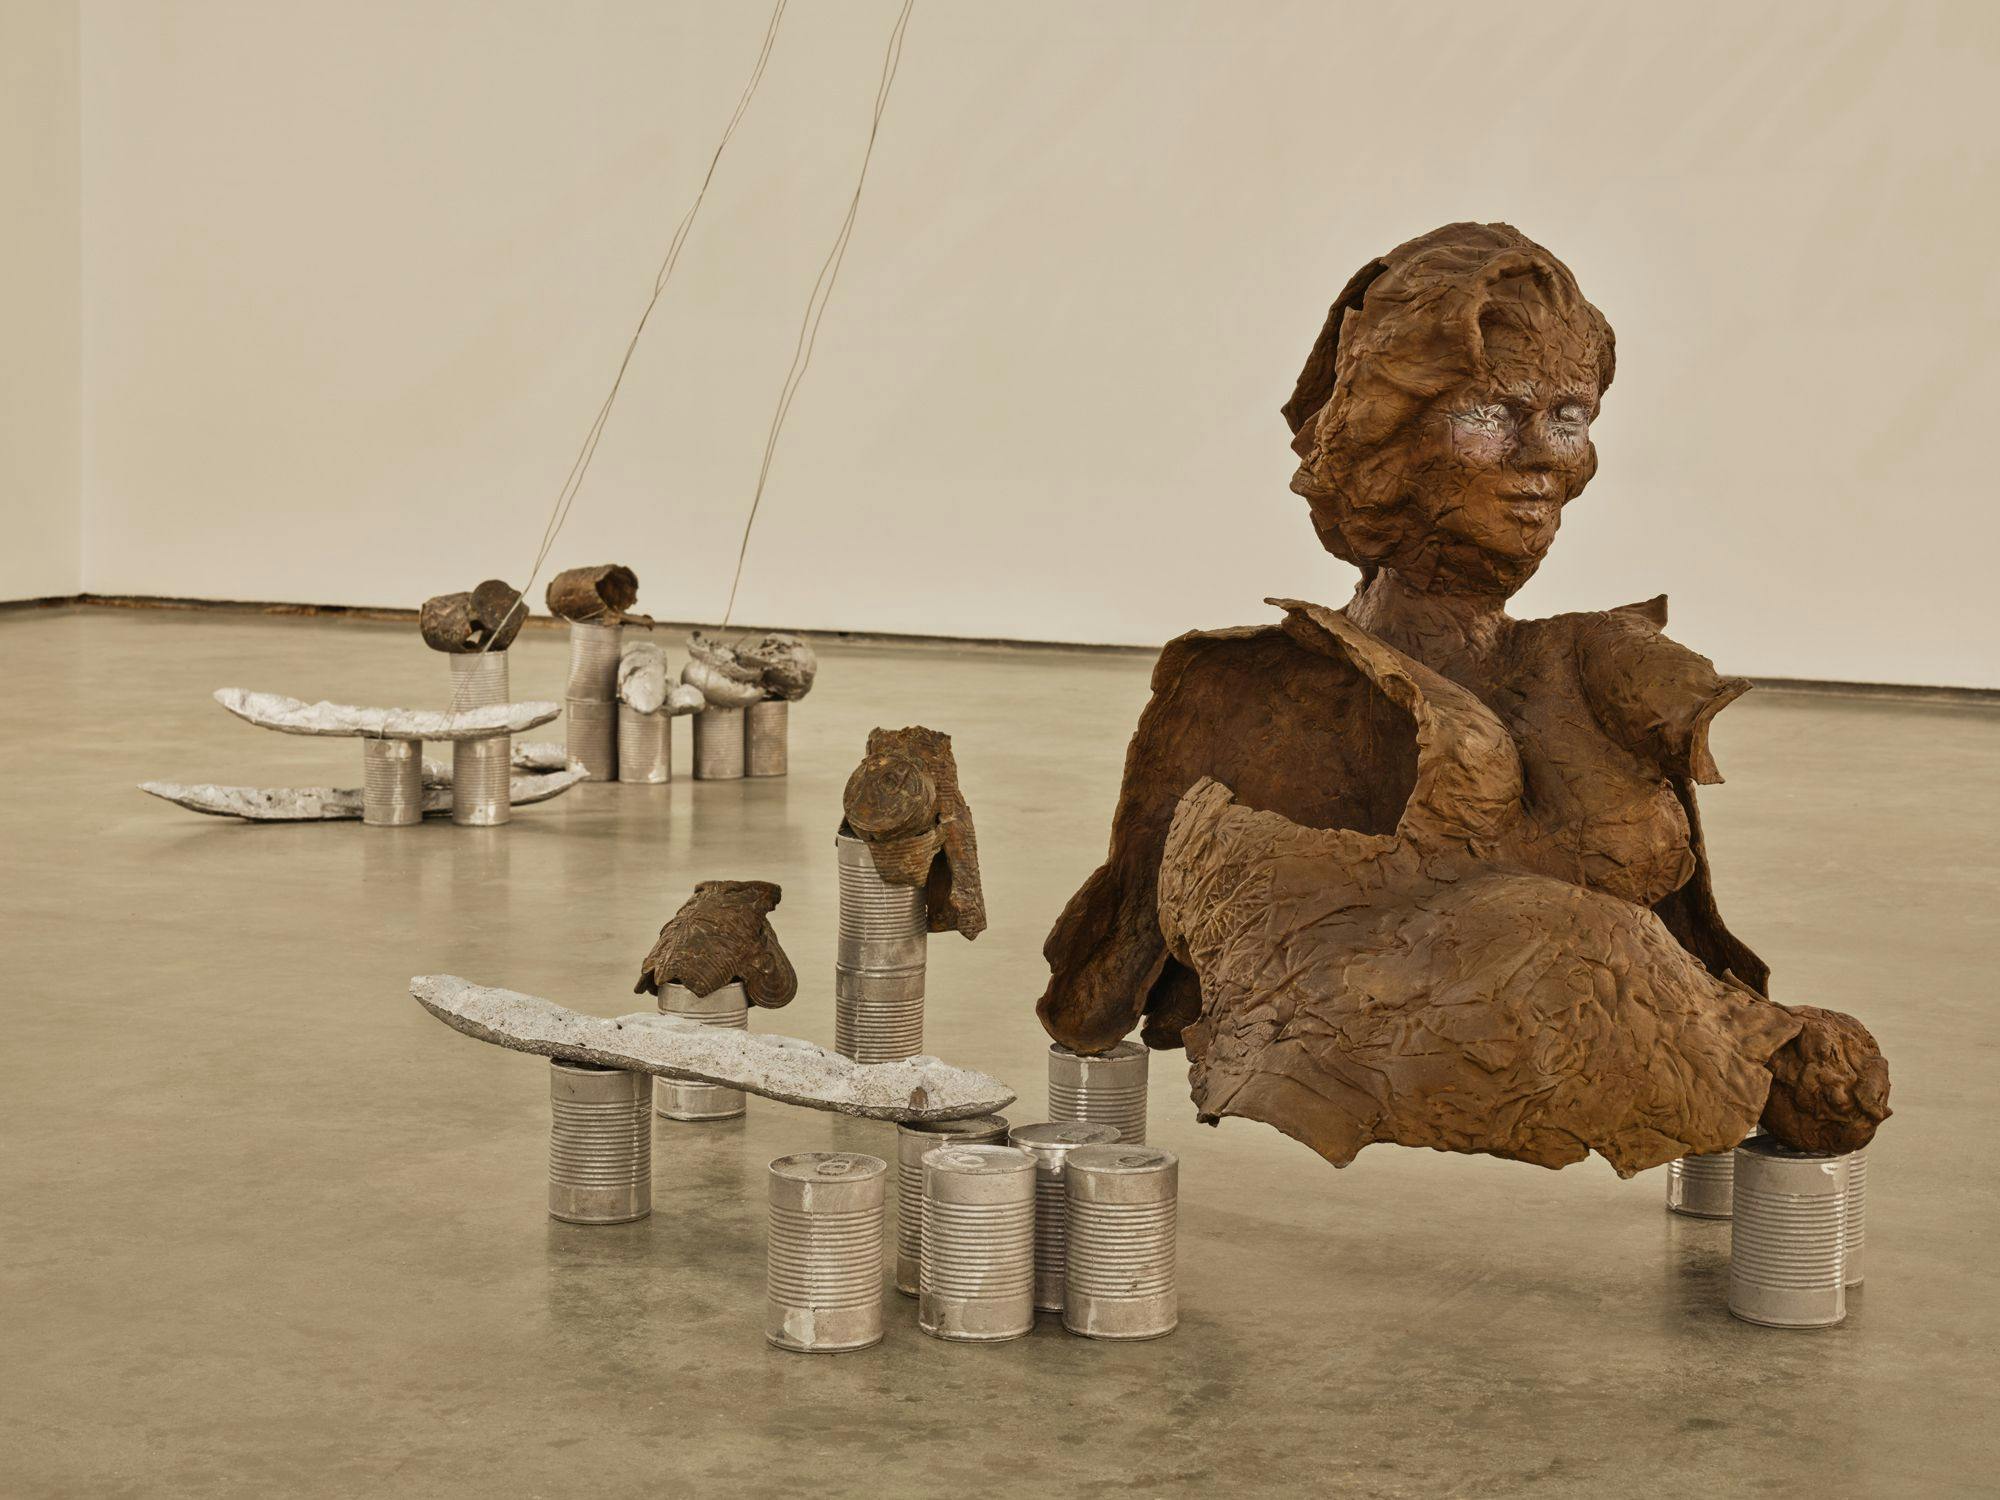 A bronze sculpture of a partial human figure sits on aluminum cans on a concrete floor. The sculpture's form appears to be precarious. Nearby are silver baguettes, aluminum cans and bronze cans that appear to be melting.